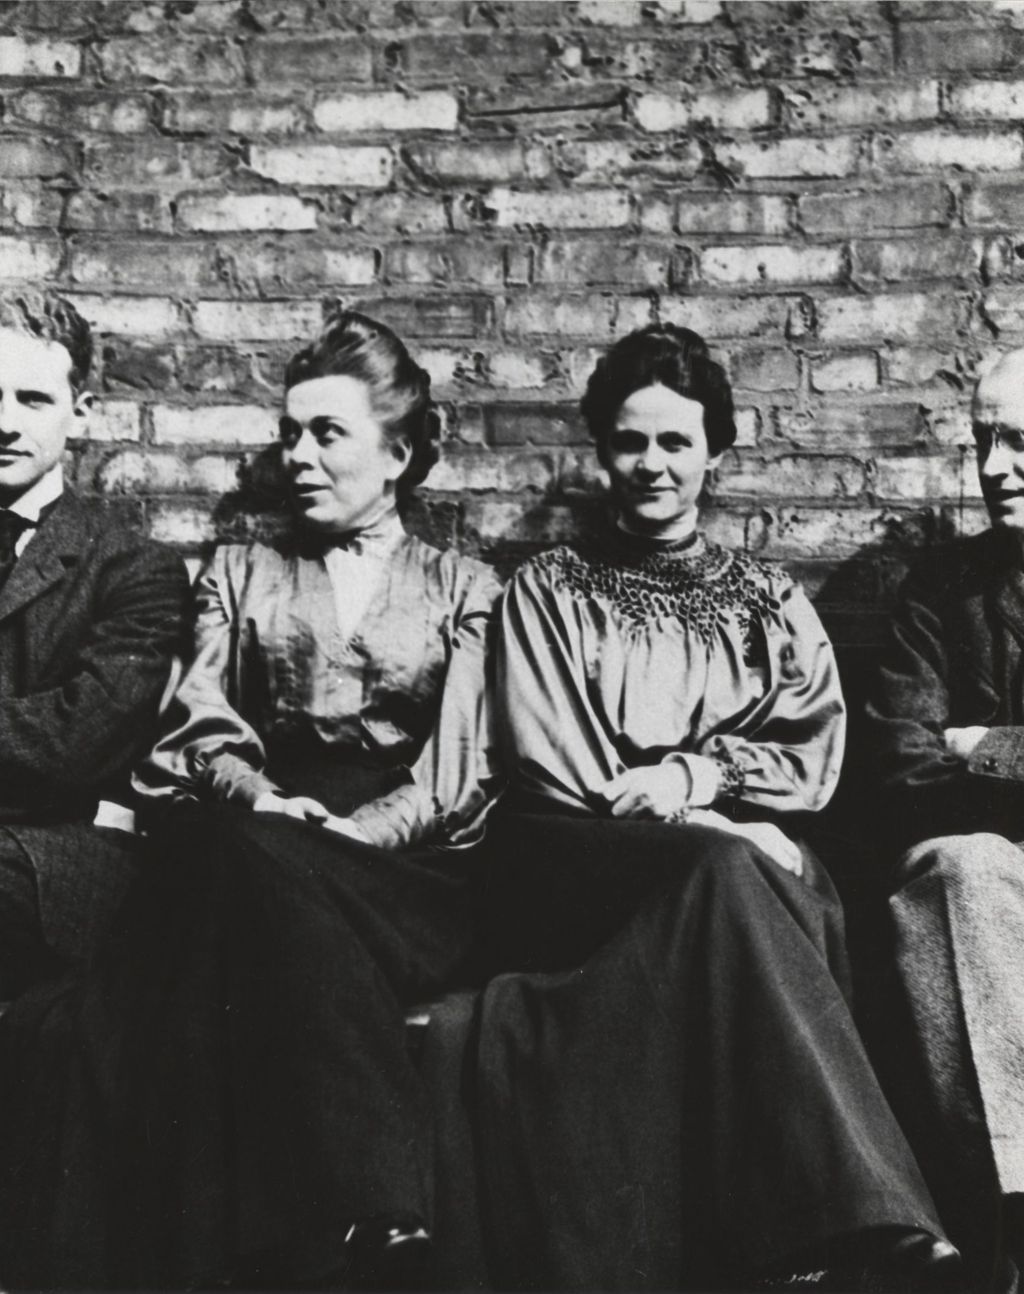 Miniature of Four people sitting on a bench against a brick wall